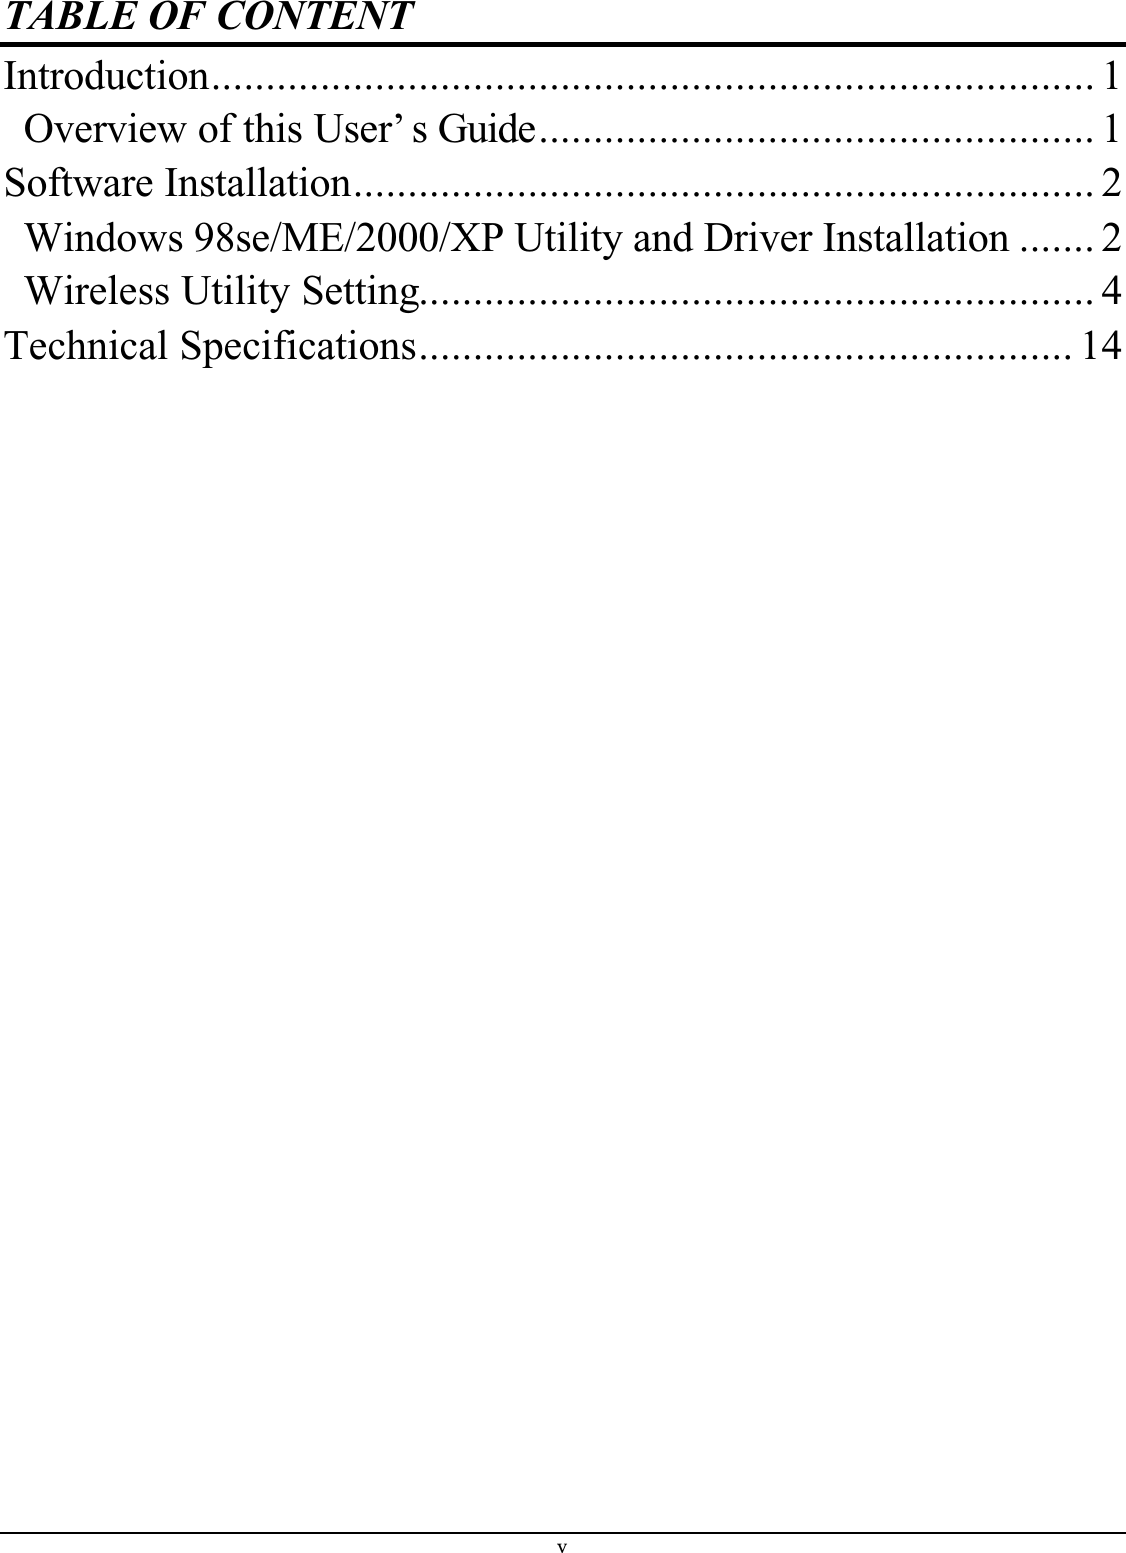 vTABLE OF CONTENTIntroduction................................................................................. 1Overview of this User’ s Guide................................................... 1Software Installation.................................................................... 2Windows 98se/ME/2000/XP Utility and Driver Installation ....... 2Wireless Utility Setting.............................................................. 4Technical Specifications............................................................ 14